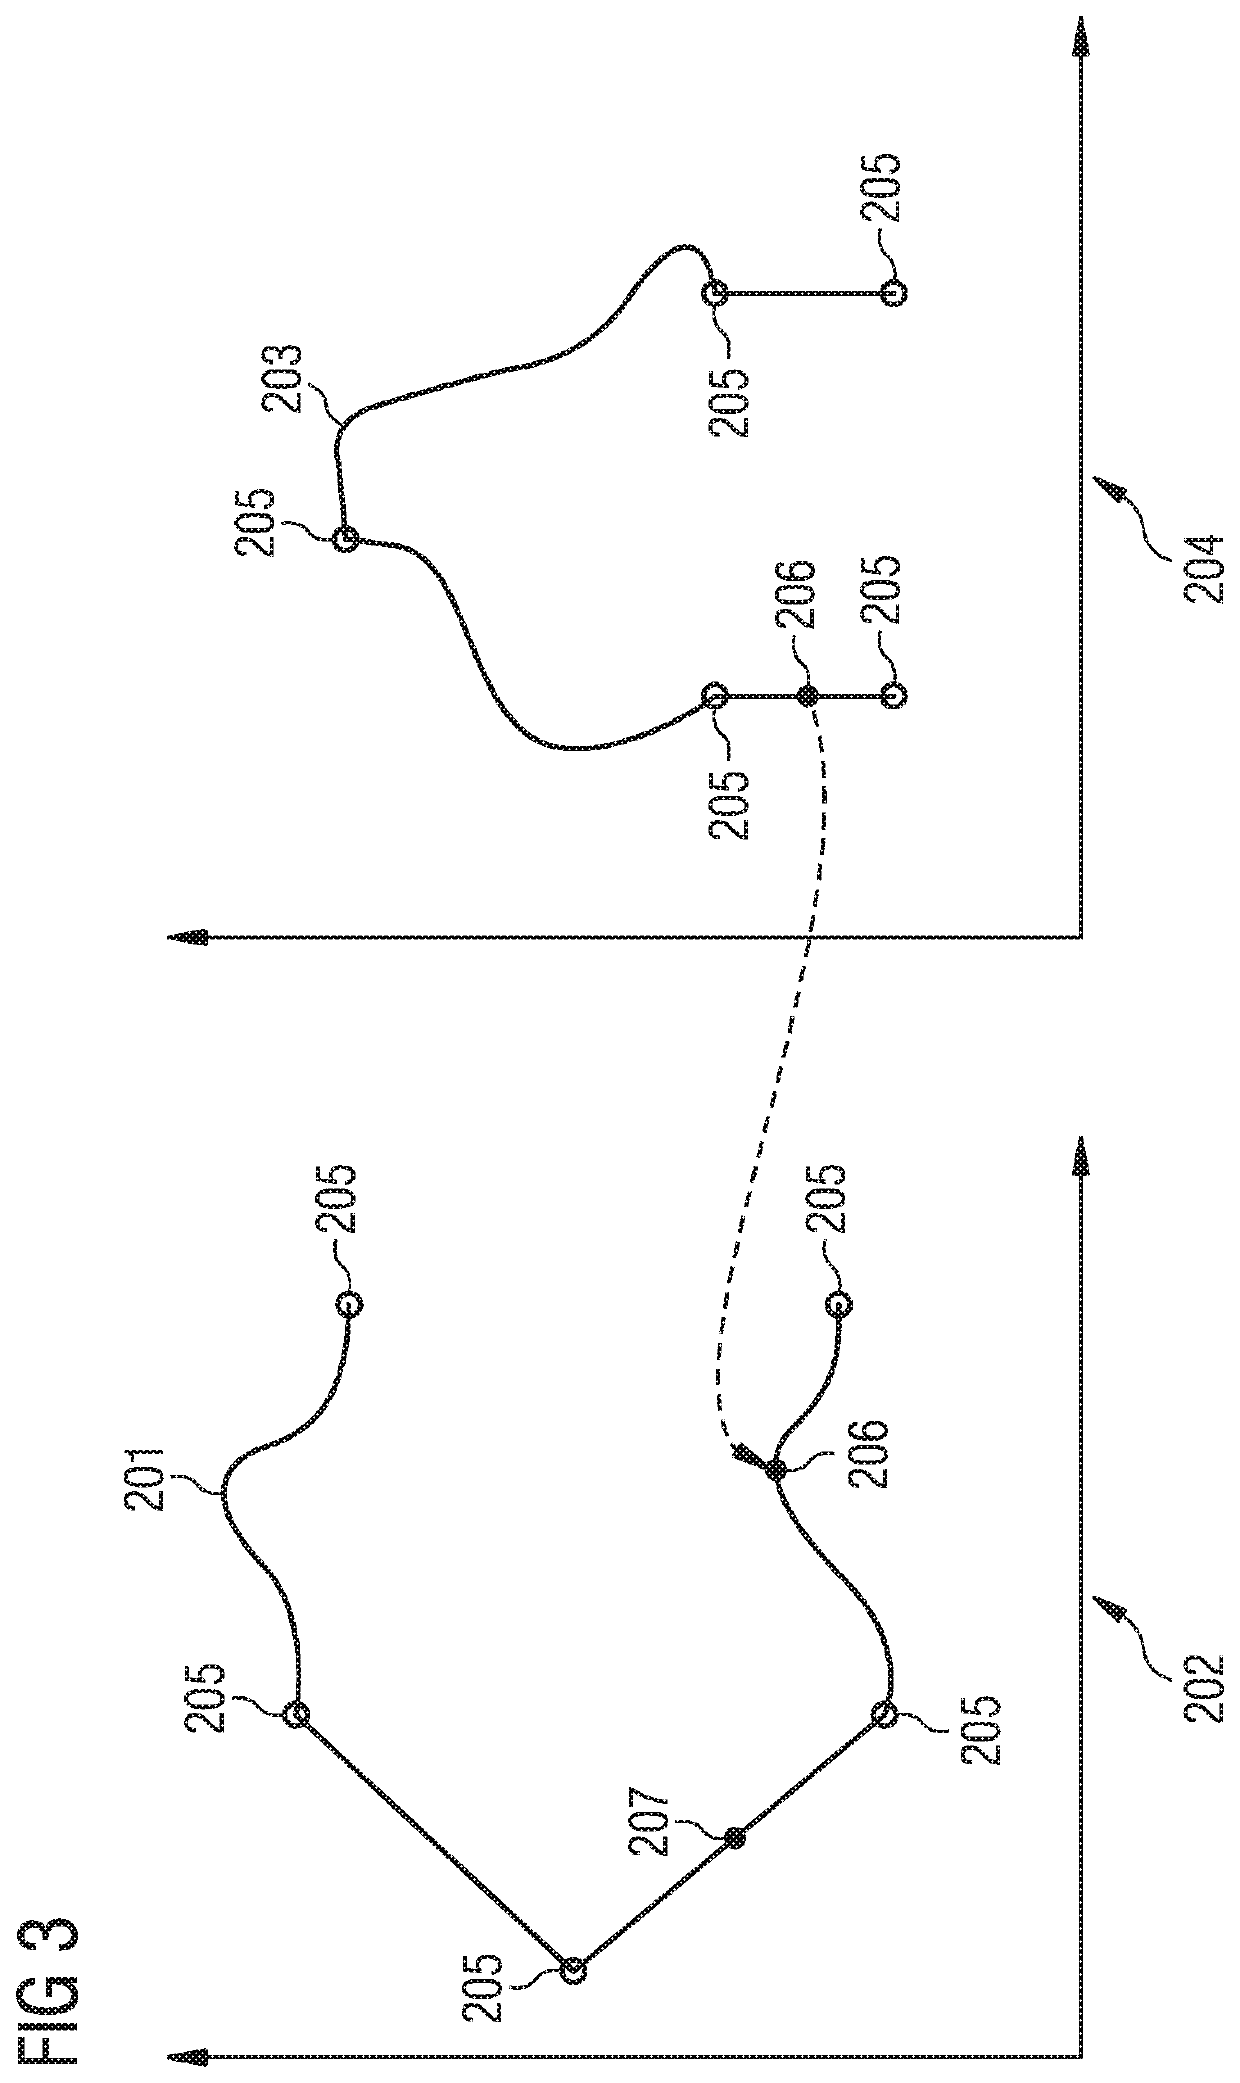 Computer-assisted ascertainment of a movement of an apparatus